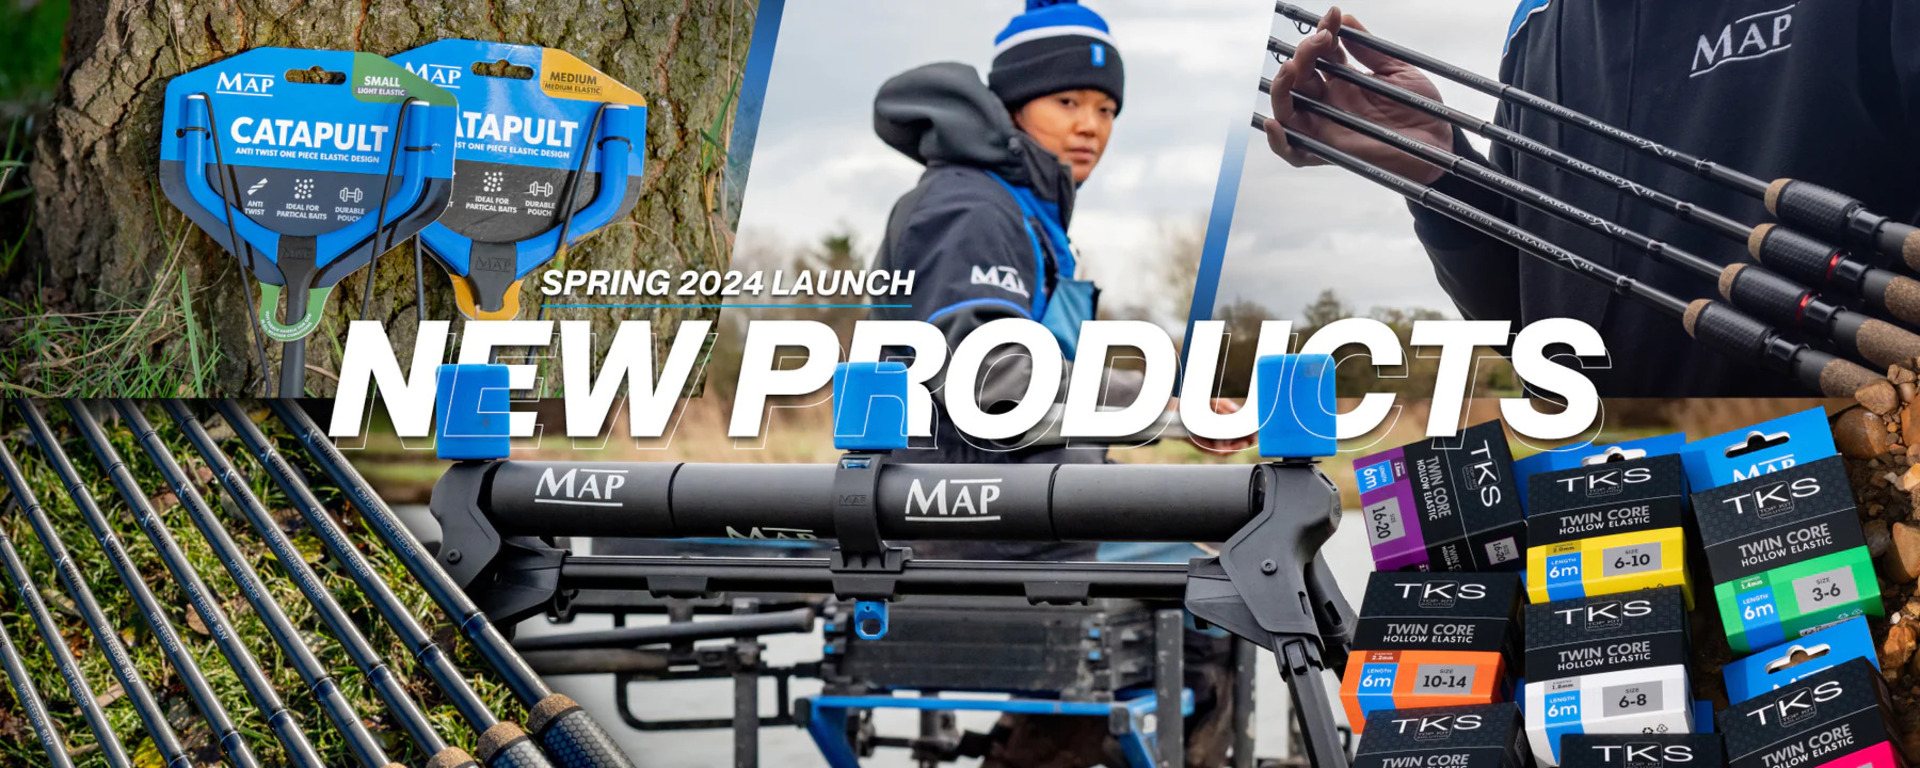 MAP New Products